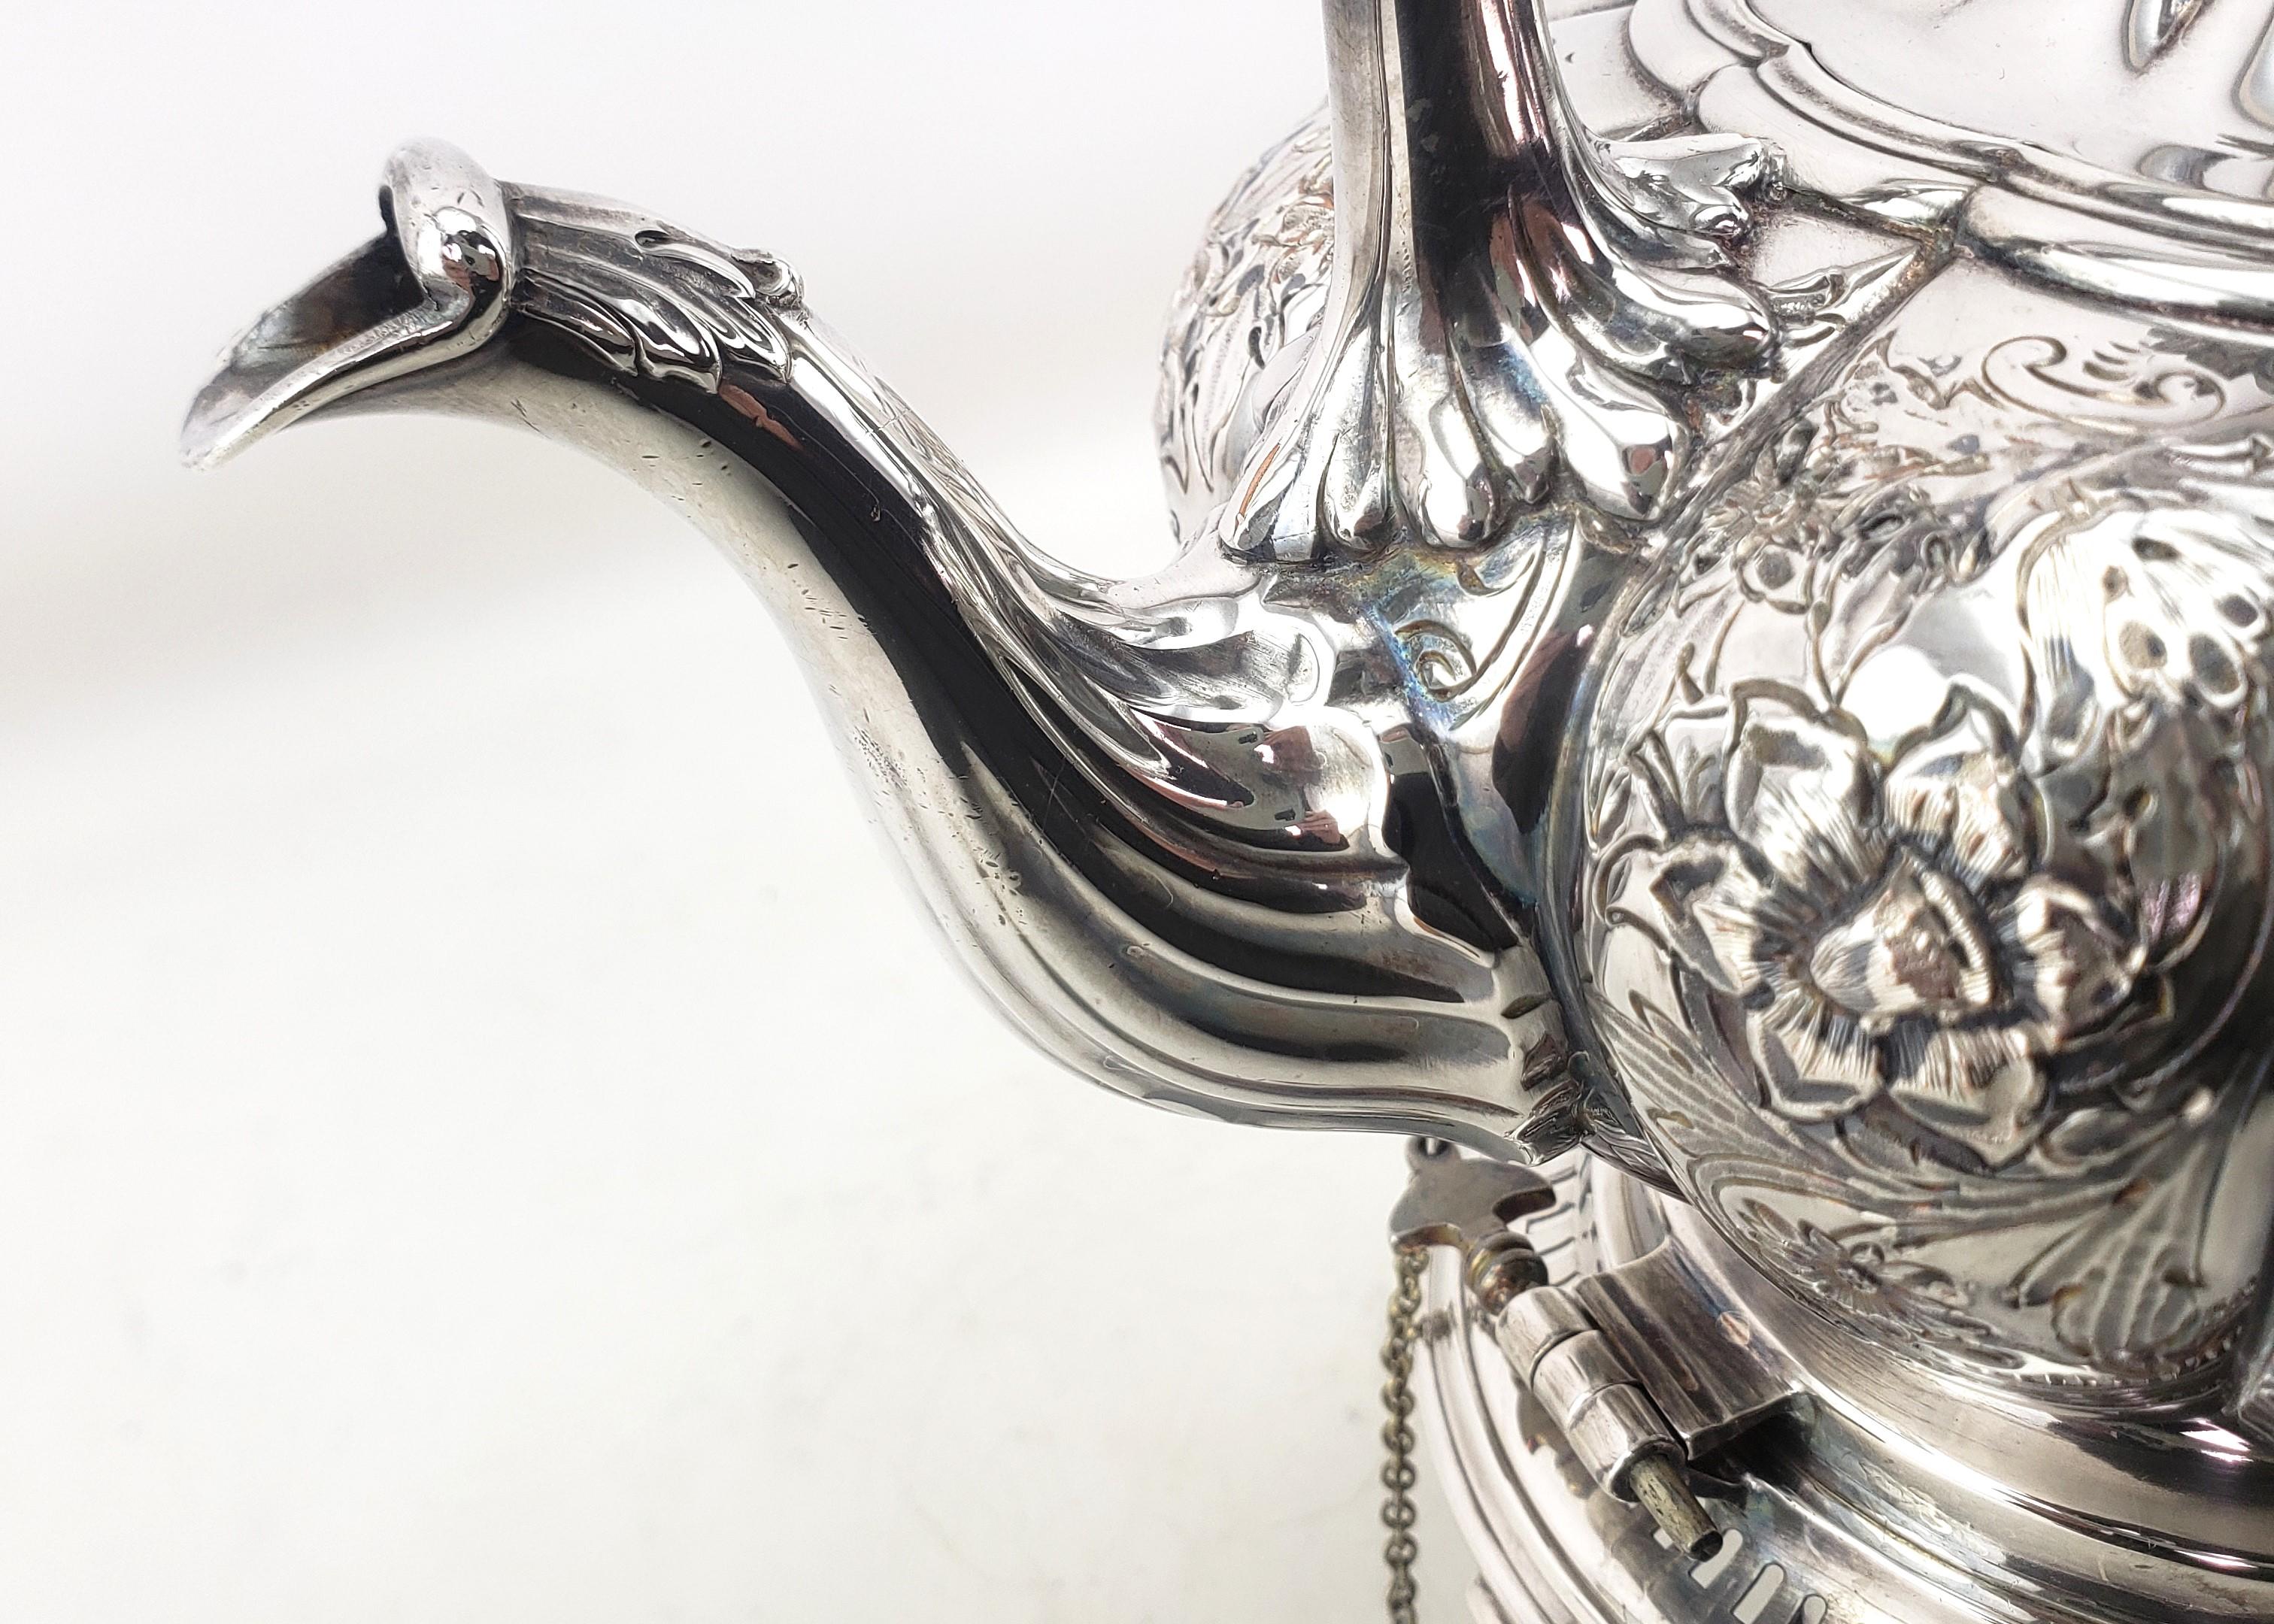 Antique English Silver Plated Tipping Hot Water Kettle with Chased Floral Motif For Sale 6